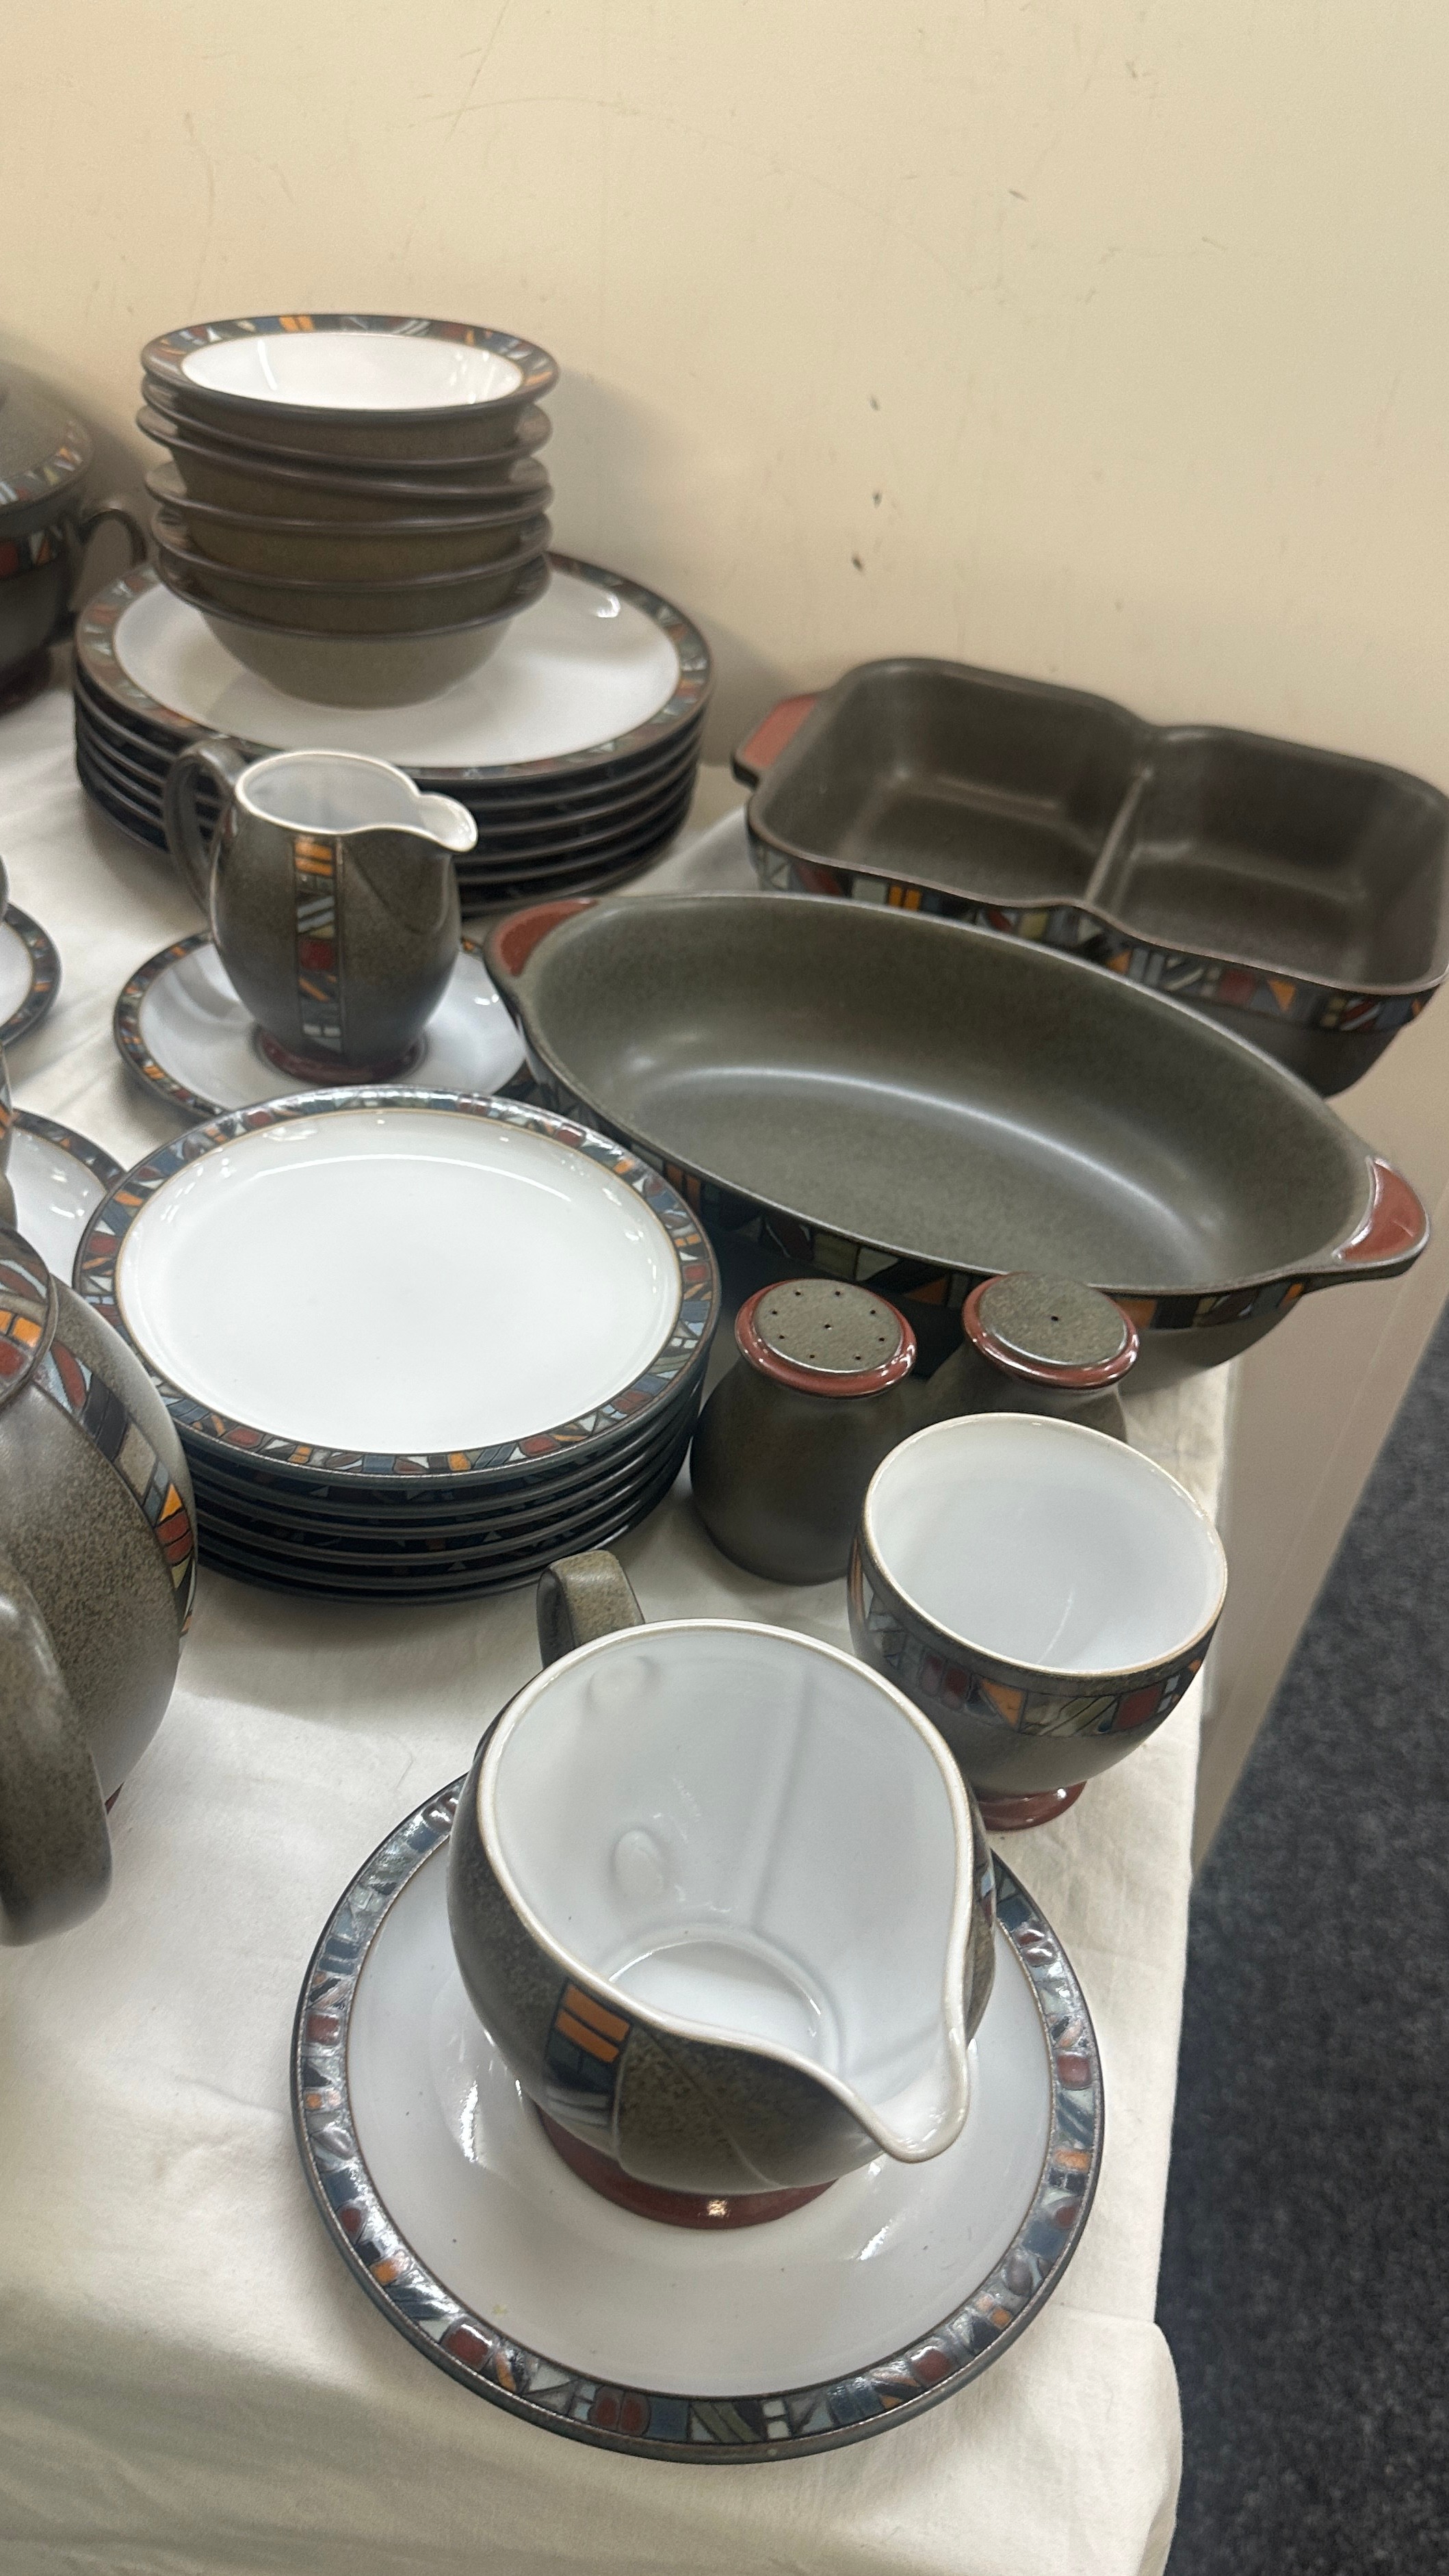 Denby Marrakesh dinner service, 43 pieces in total includes Tureen, cups, saucers, plates, salt - Image 6 of 6